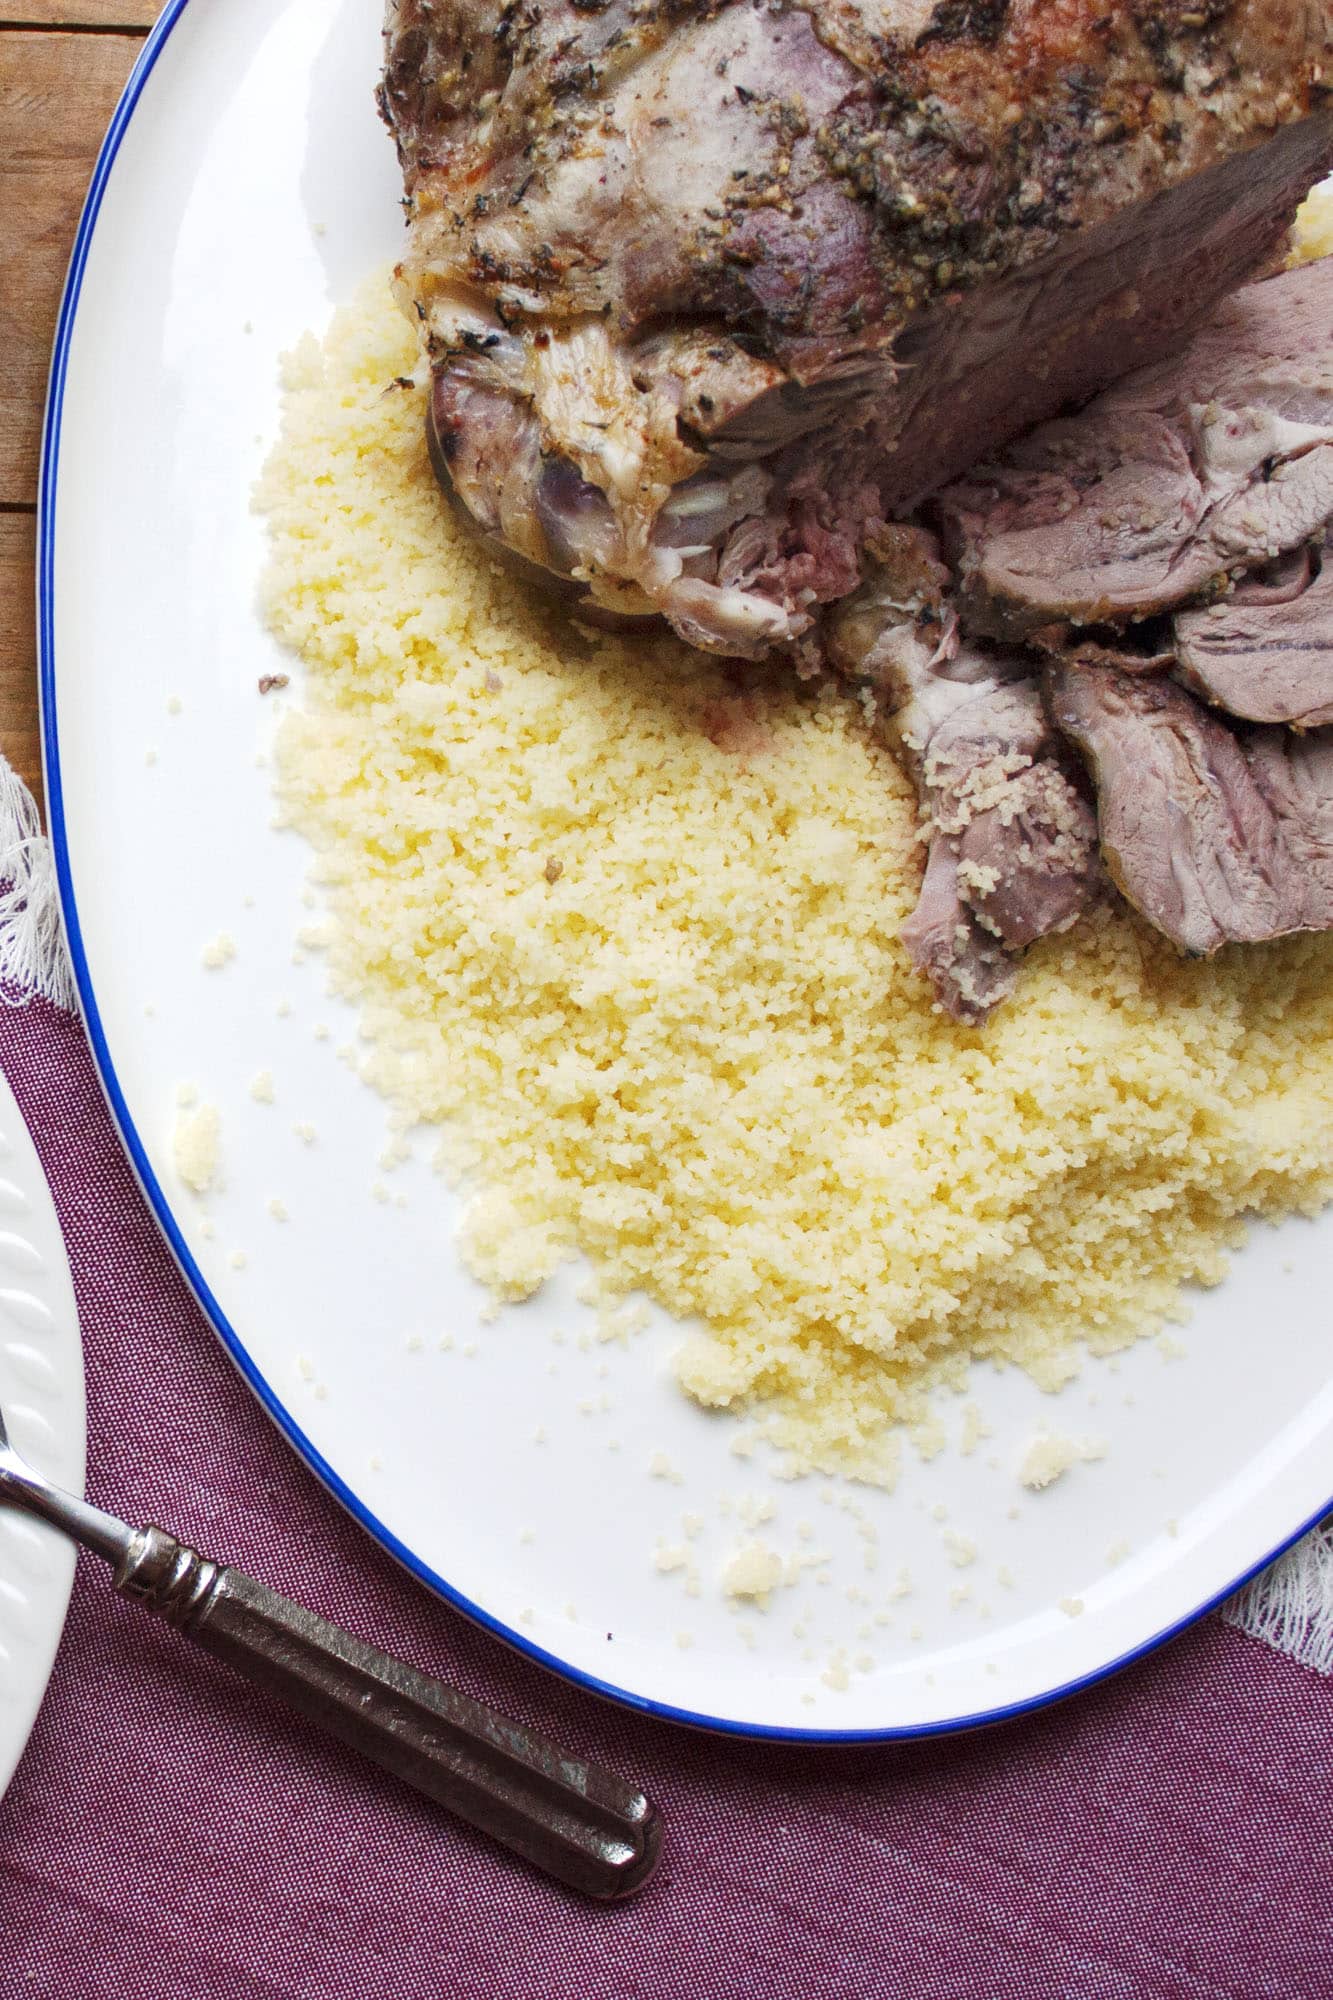 Partly sliced leg of lamb on a bed of couscous.